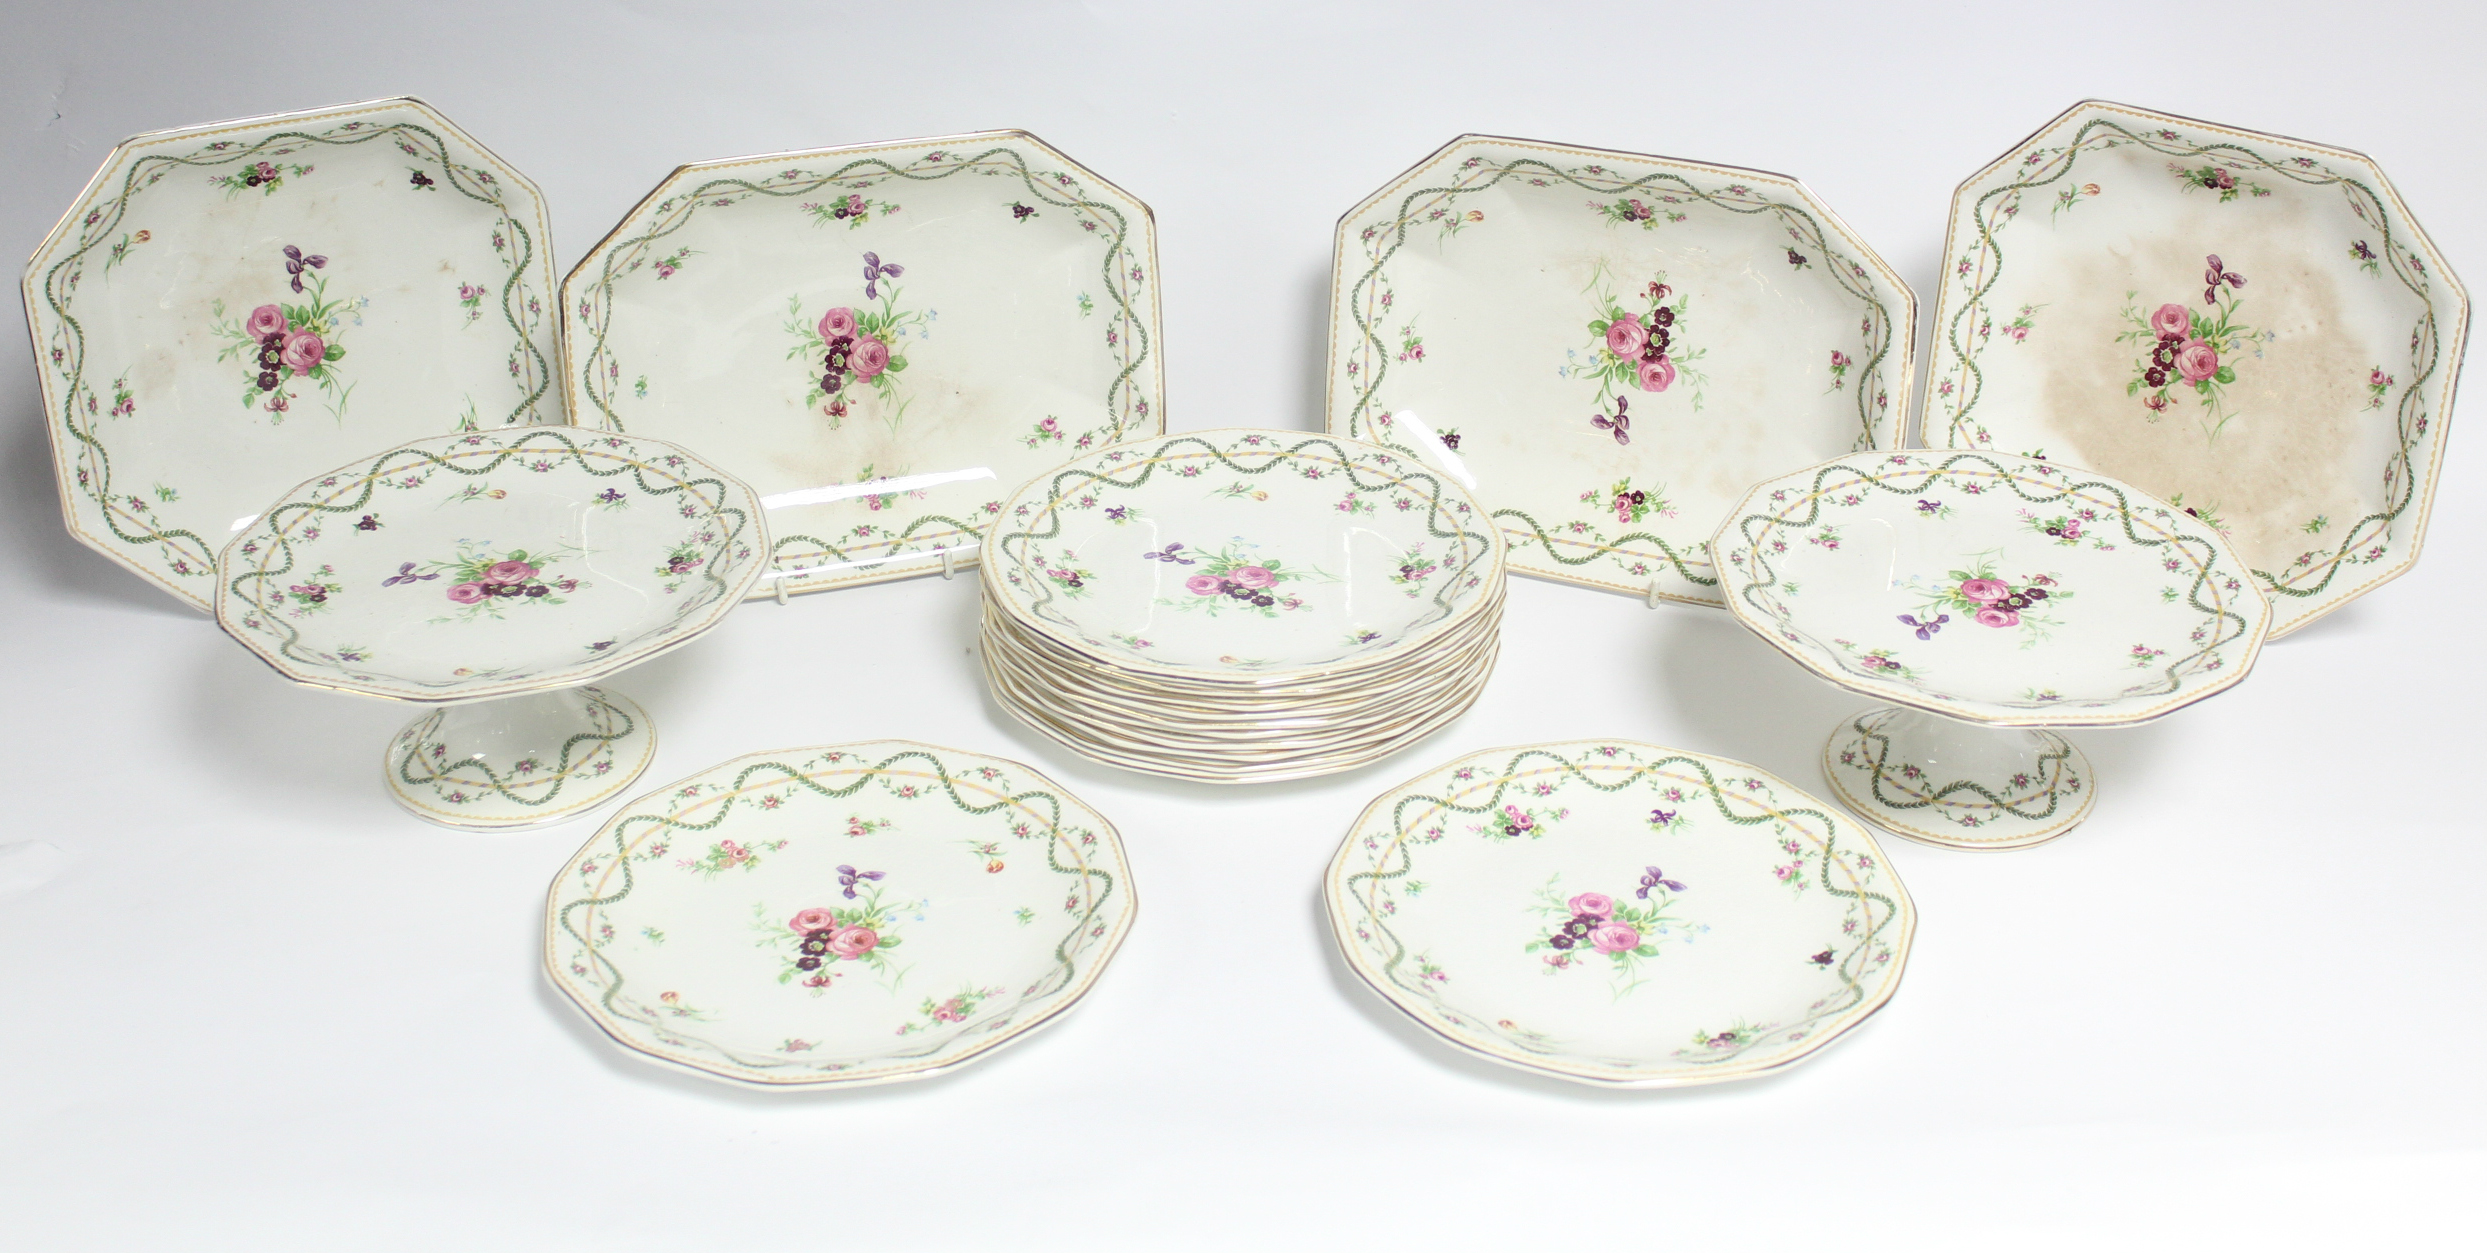 A Wedgwood & Co. “Imperial Porcelain” dessert service with floral decoration, comprising a pair of